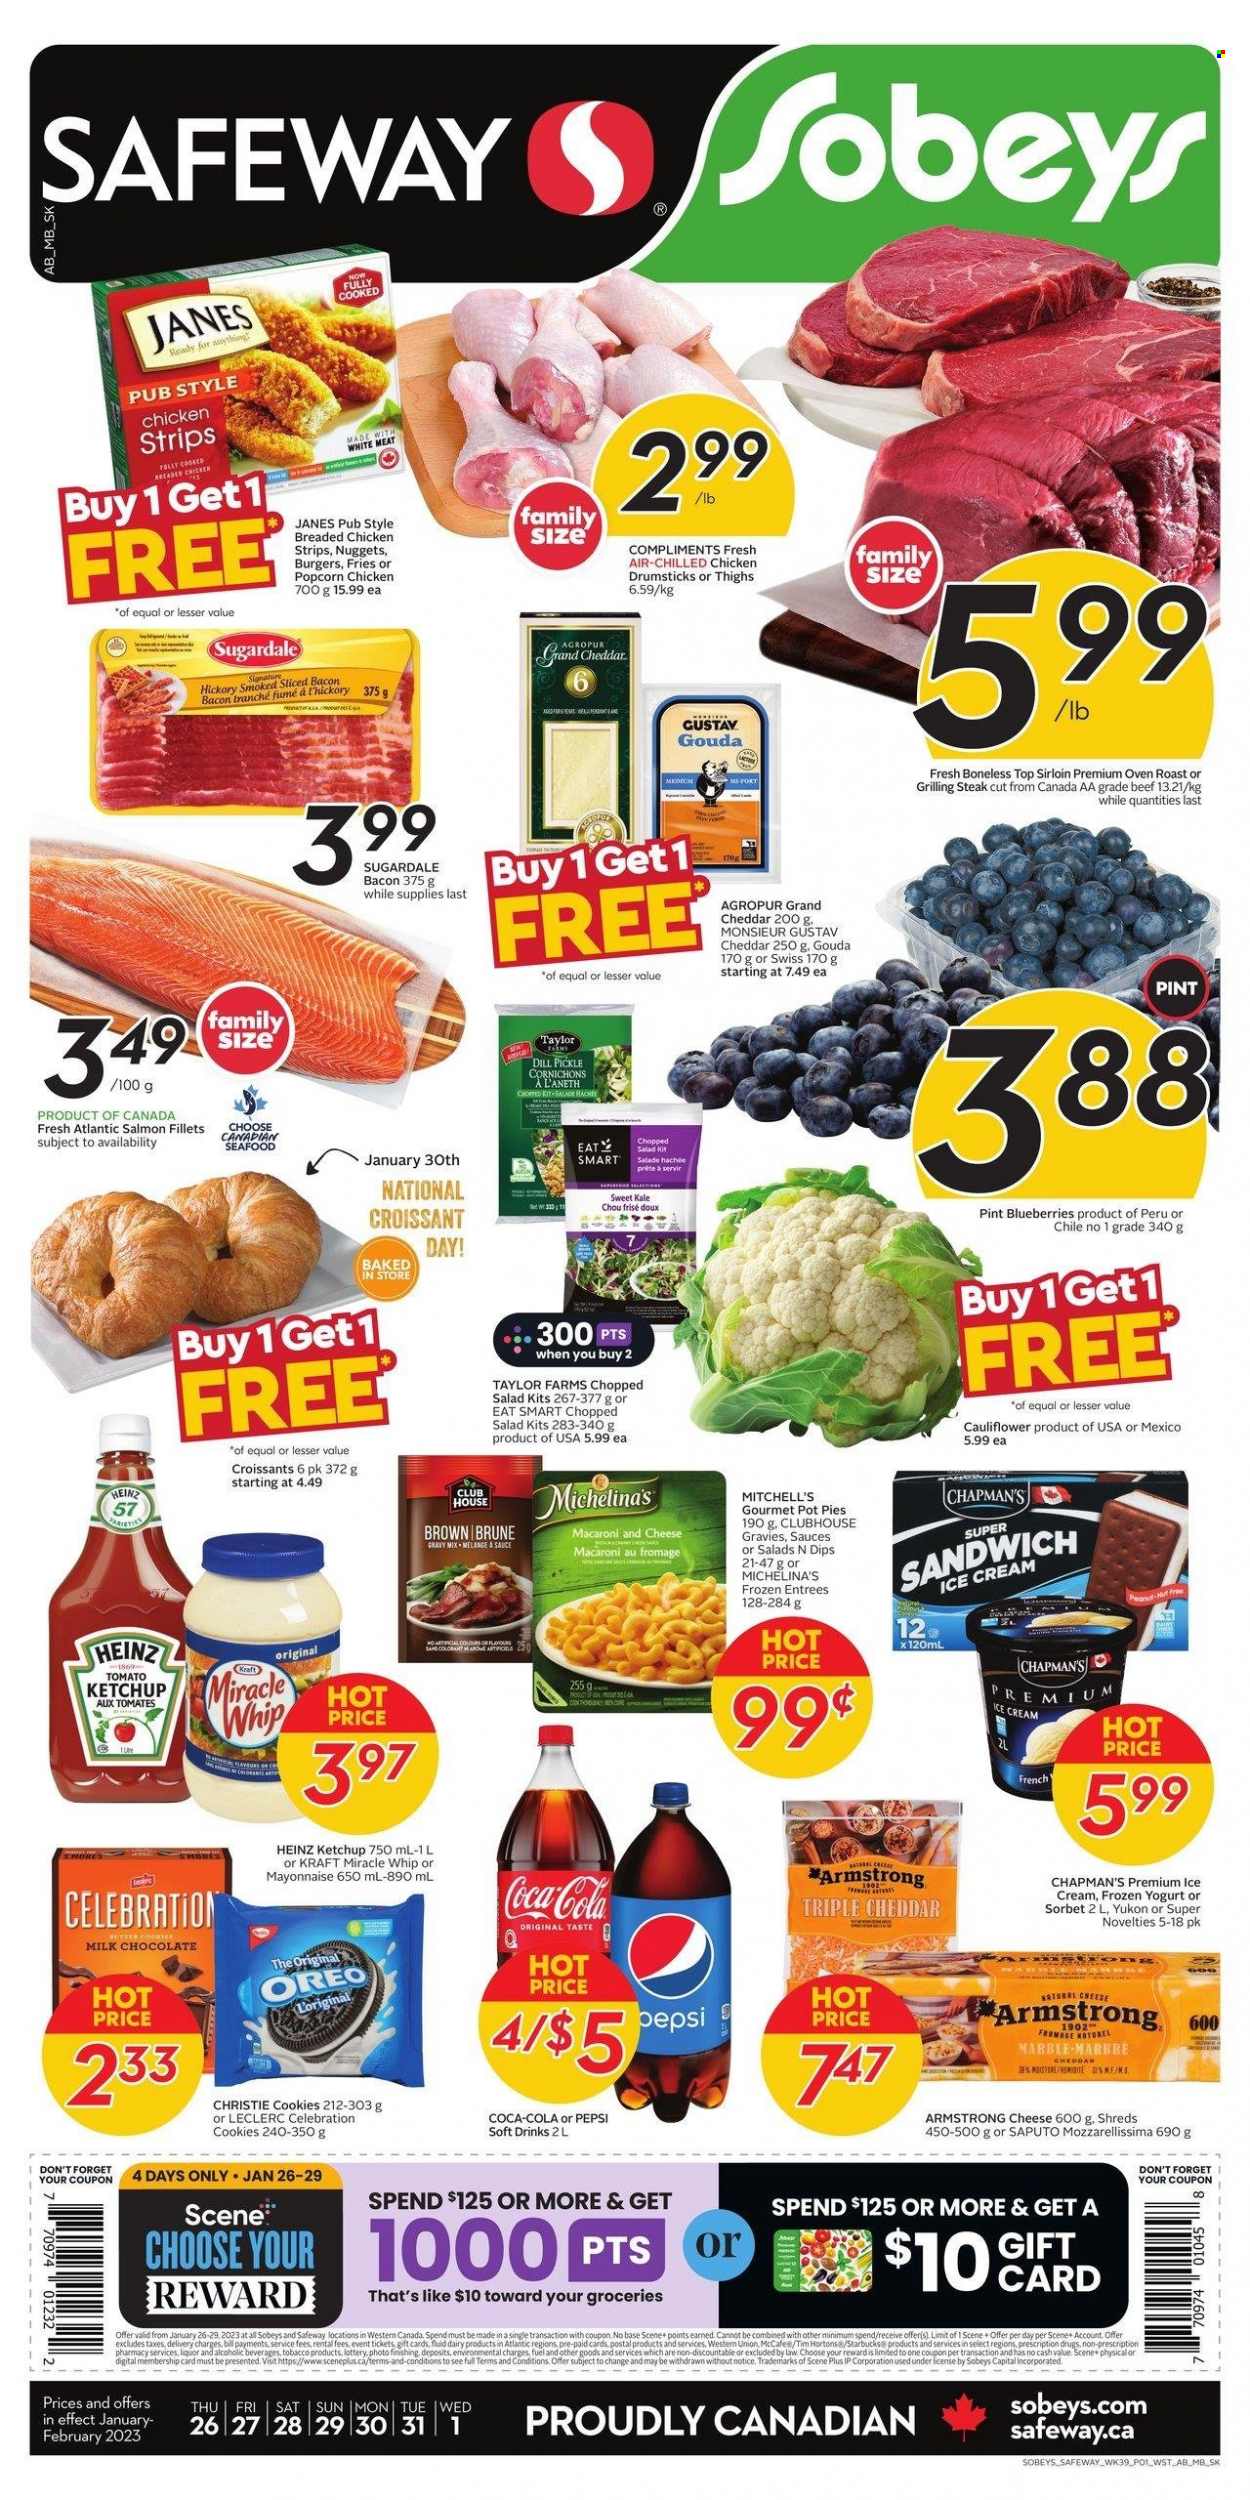 thumbnail - Sobeys Flyer - January 26, 2023 - February 01, 2023 - Sales products - croissant, pot pie, cauliflower, kale, salad, chopped salad, salmon, salmon fillet, seafood, macaroni & cheese, sandwich, nuggets, hamburger, fried chicken, Kraft®, Sugardale, bacon, gouda, cheddar, yoghurt, mayonnaise, Miracle Whip, ice cream, strips, chicken strips, potato fries, cookies, milk chocolate, Celebration, dill pickle, popcorn, dill, gravy mix, Coca-Cola, Pepsi, soft drink, hot chocolate, Starbucks, McCafe, liquor, chicken drumsticks, chicken, Heinz, ketchup, Oreo, steak. Page 1.